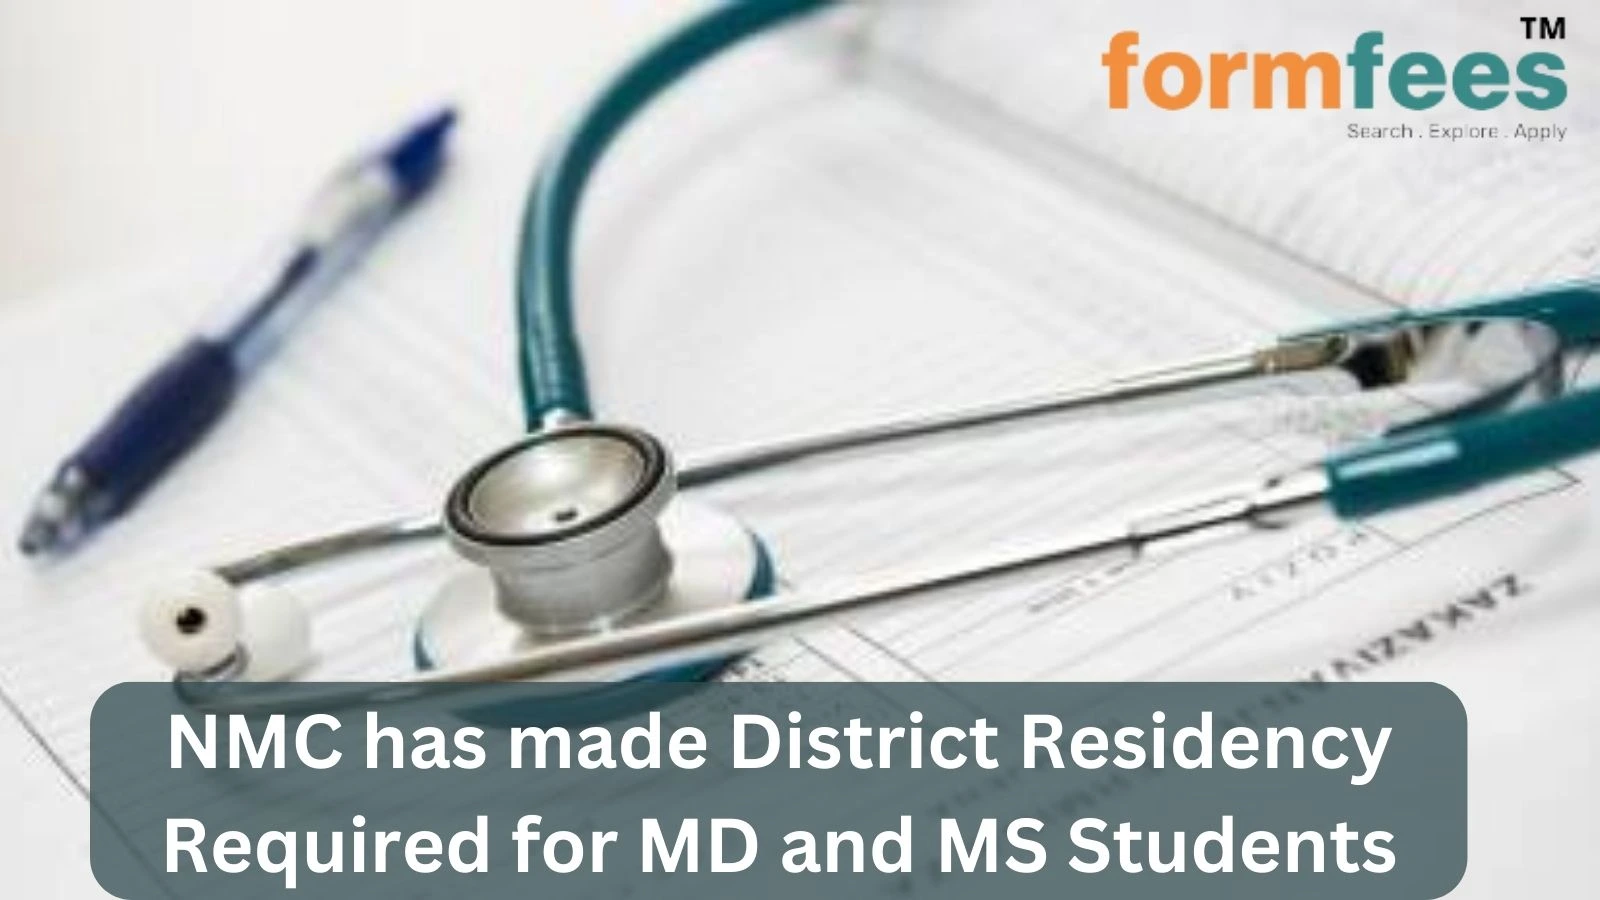 NMC has made District Residency Required for MD and MS Students